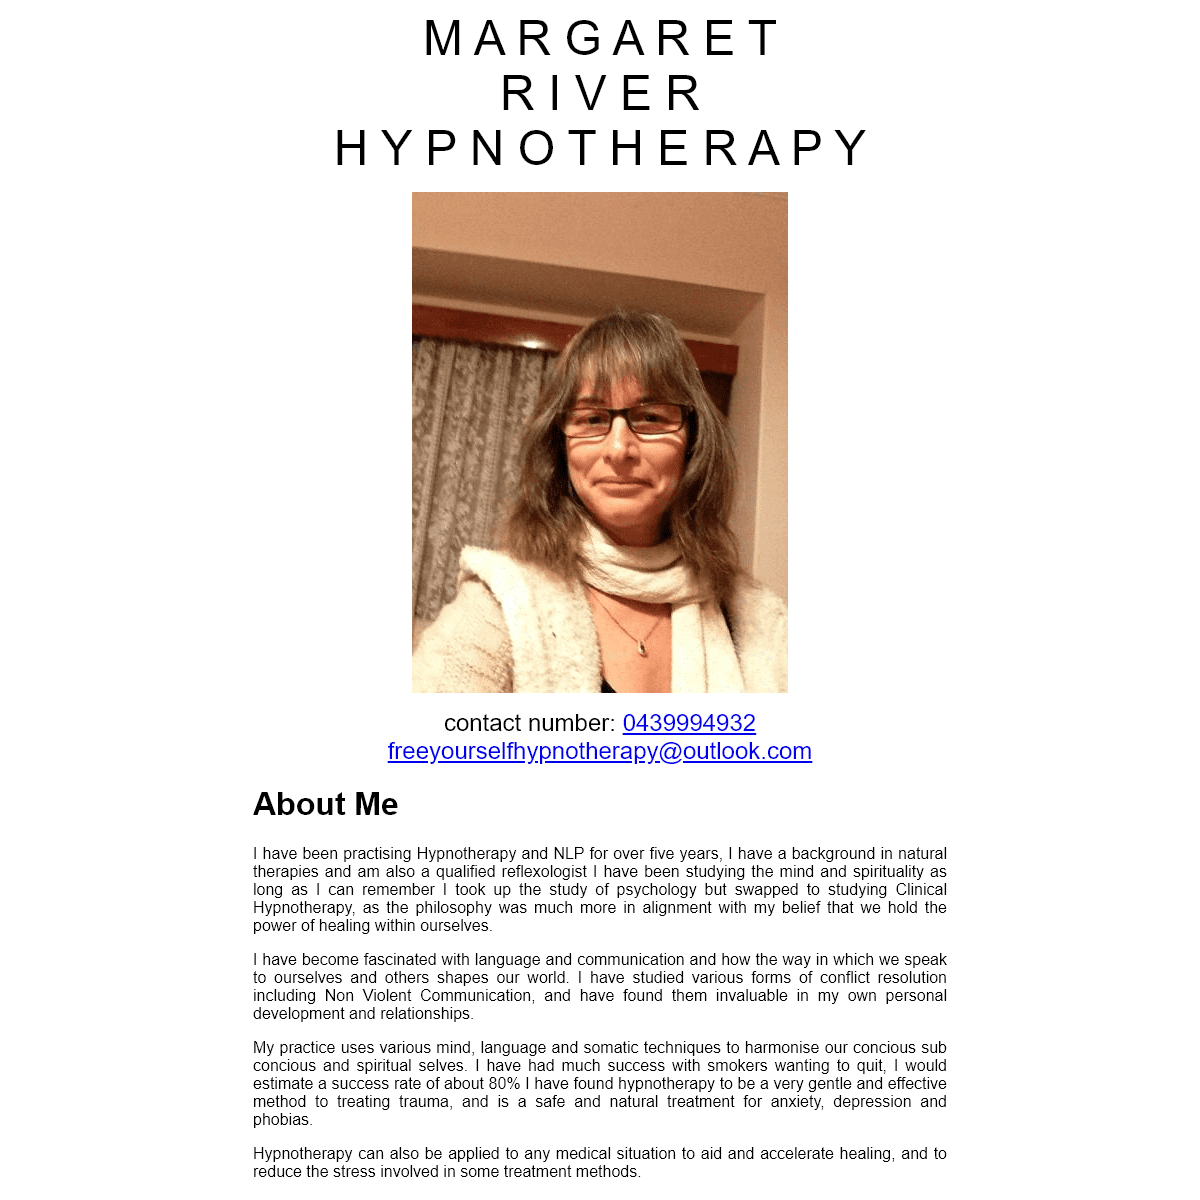 A complete backup of margaretriverhypnotherapy.com.au